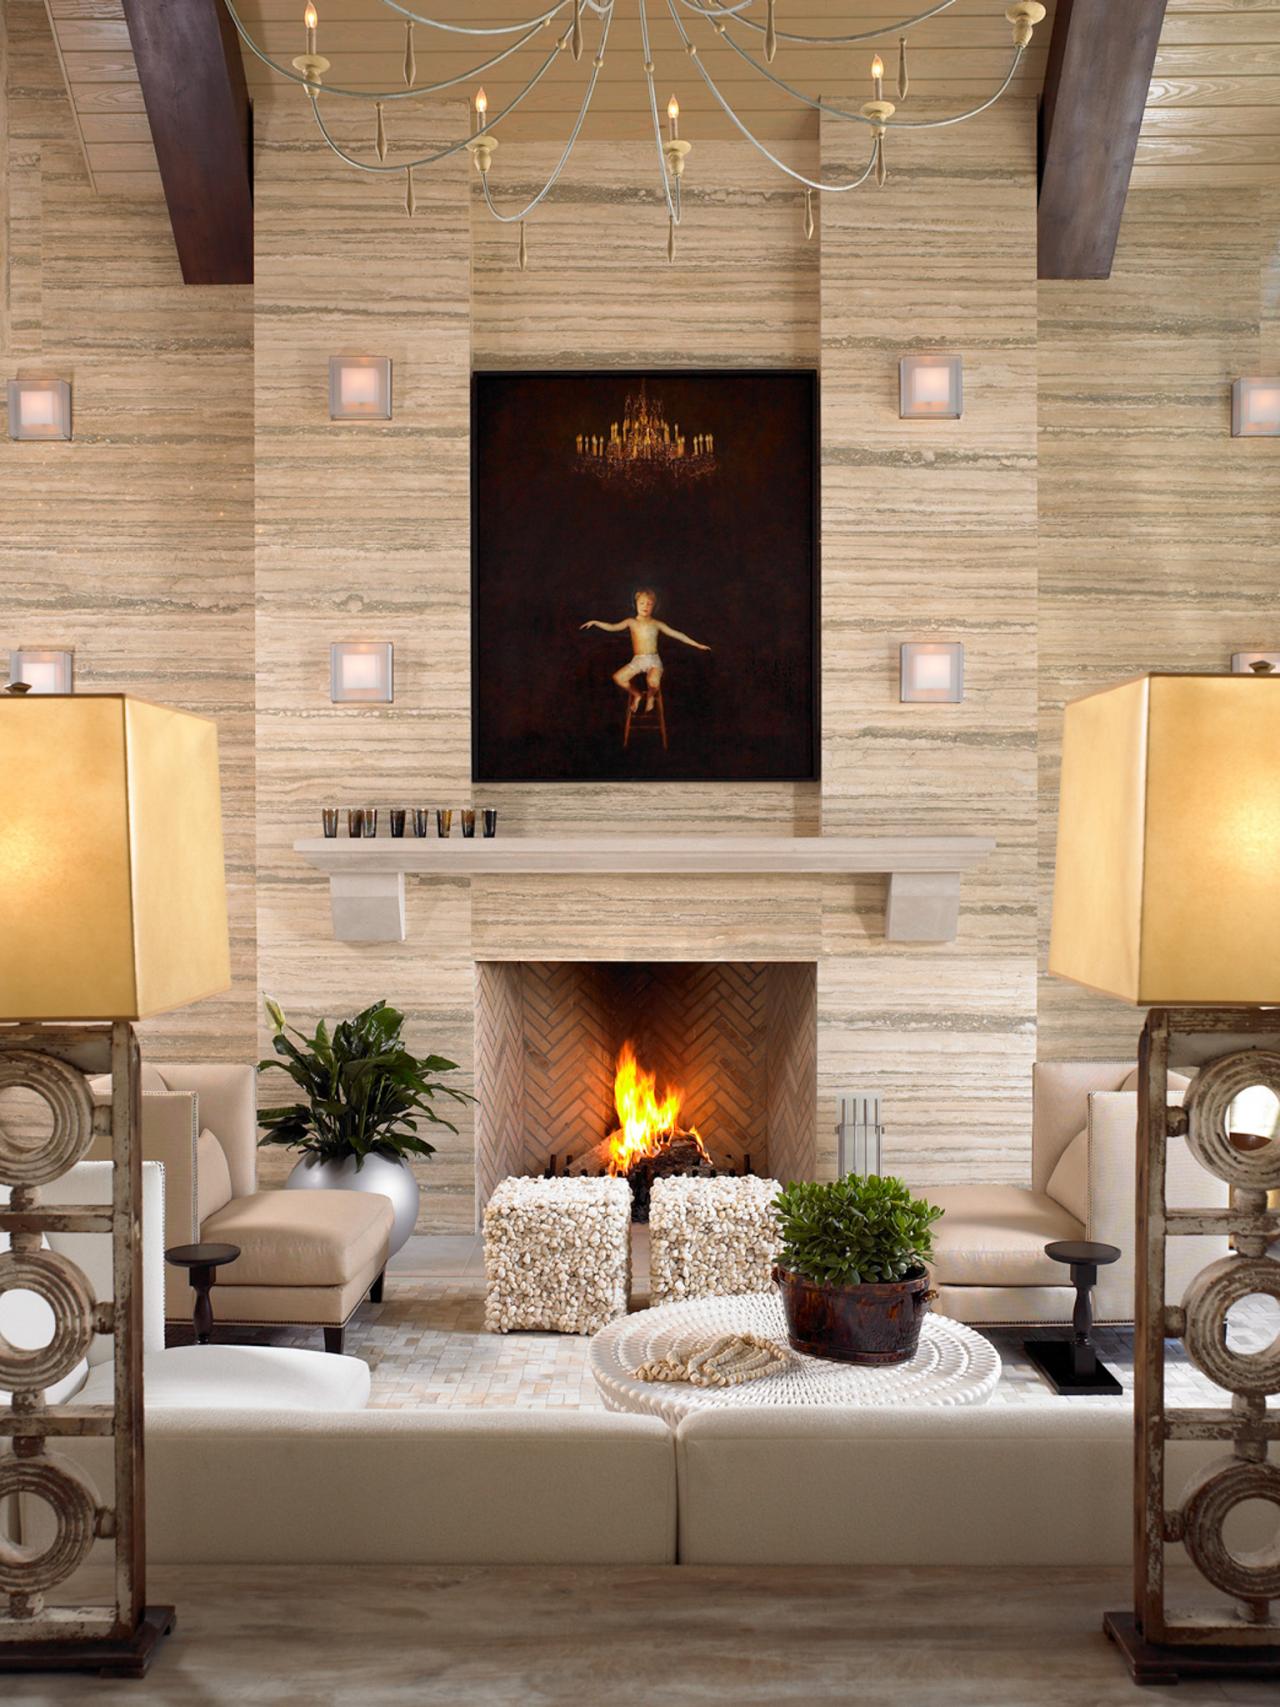 travertine room living contemporary wall fireplace accent walls modern interior stone fireplaces rooms beige beckwith interiors decorating hgtv decor architecture